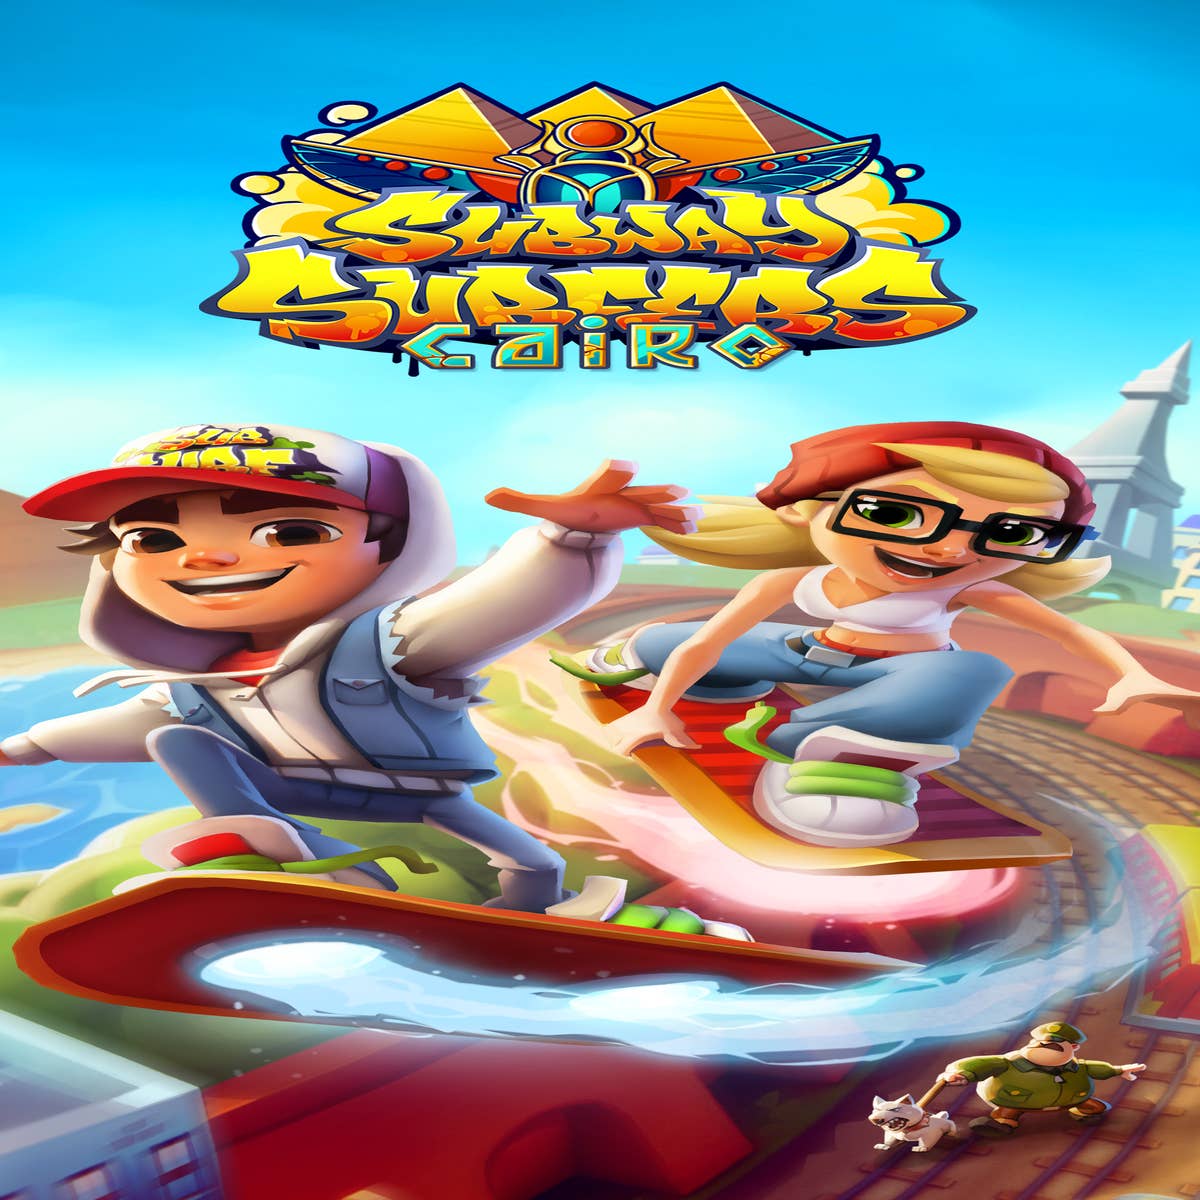 Play Subway Surfers In Berlin 2021 game free online